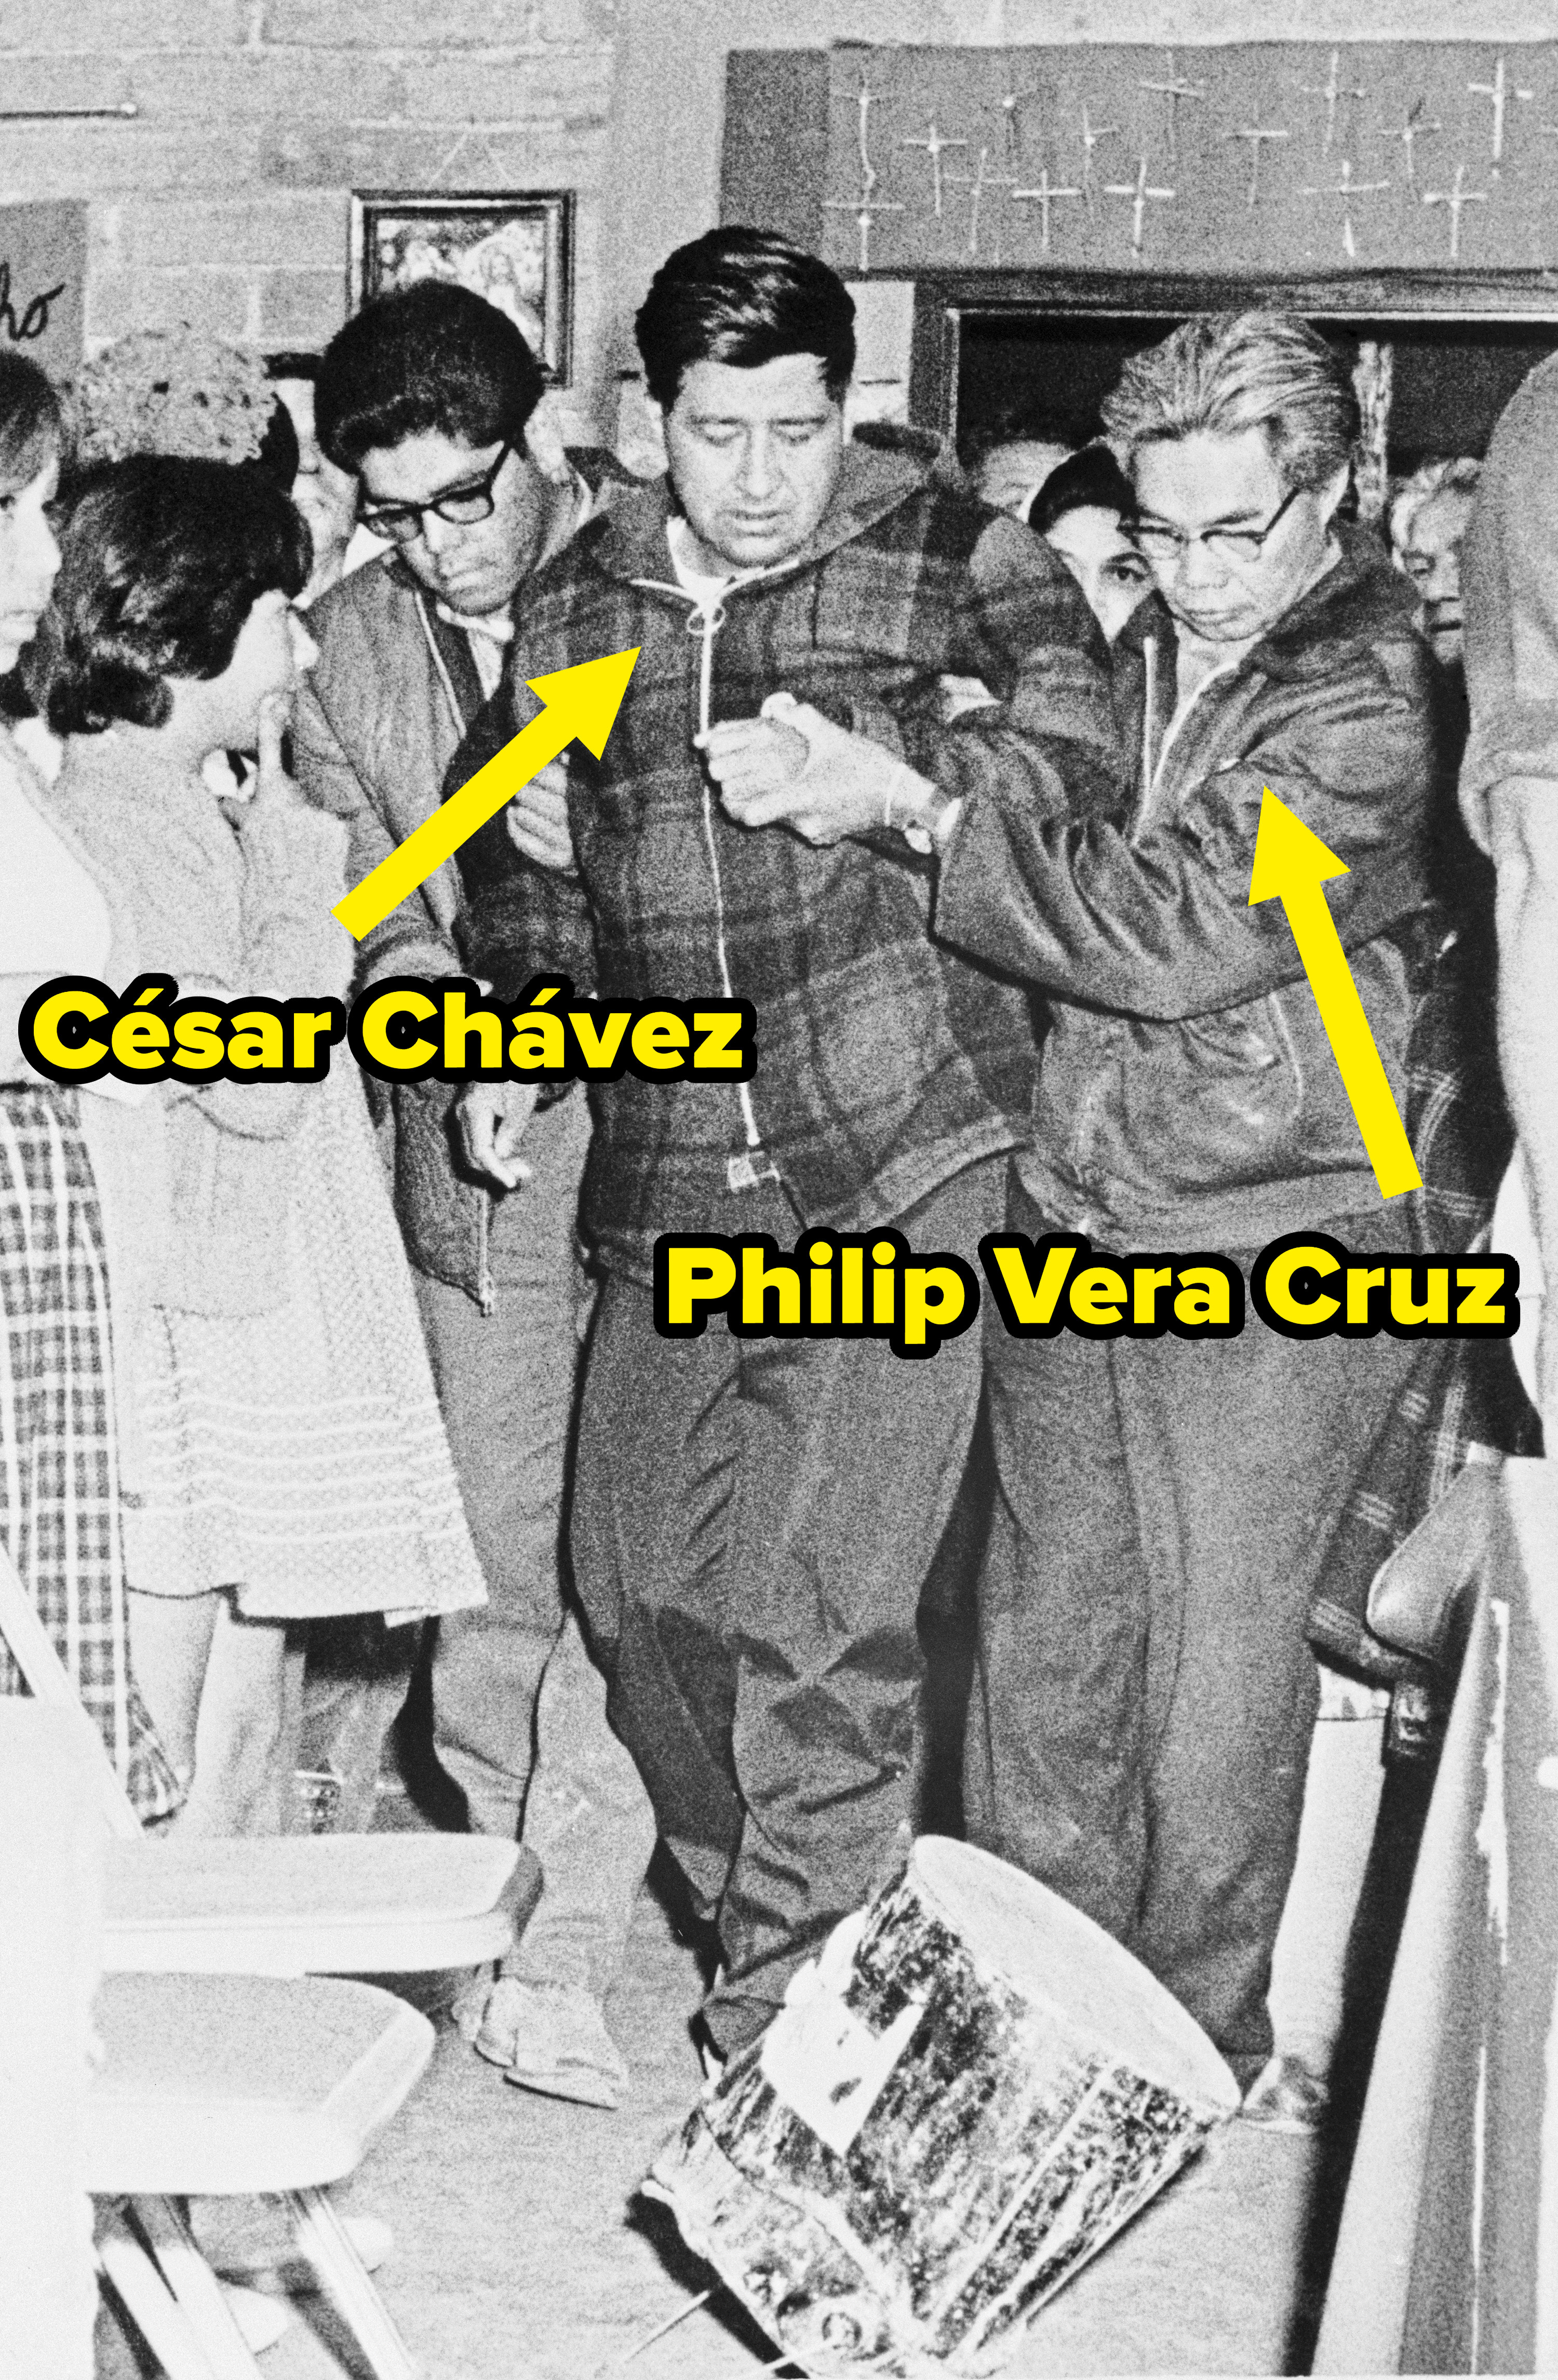 Philip Vera Cruz helps Cesar Chavez, who is weakened from a 21-day spiritual fast, walk to attend a mass in his honor